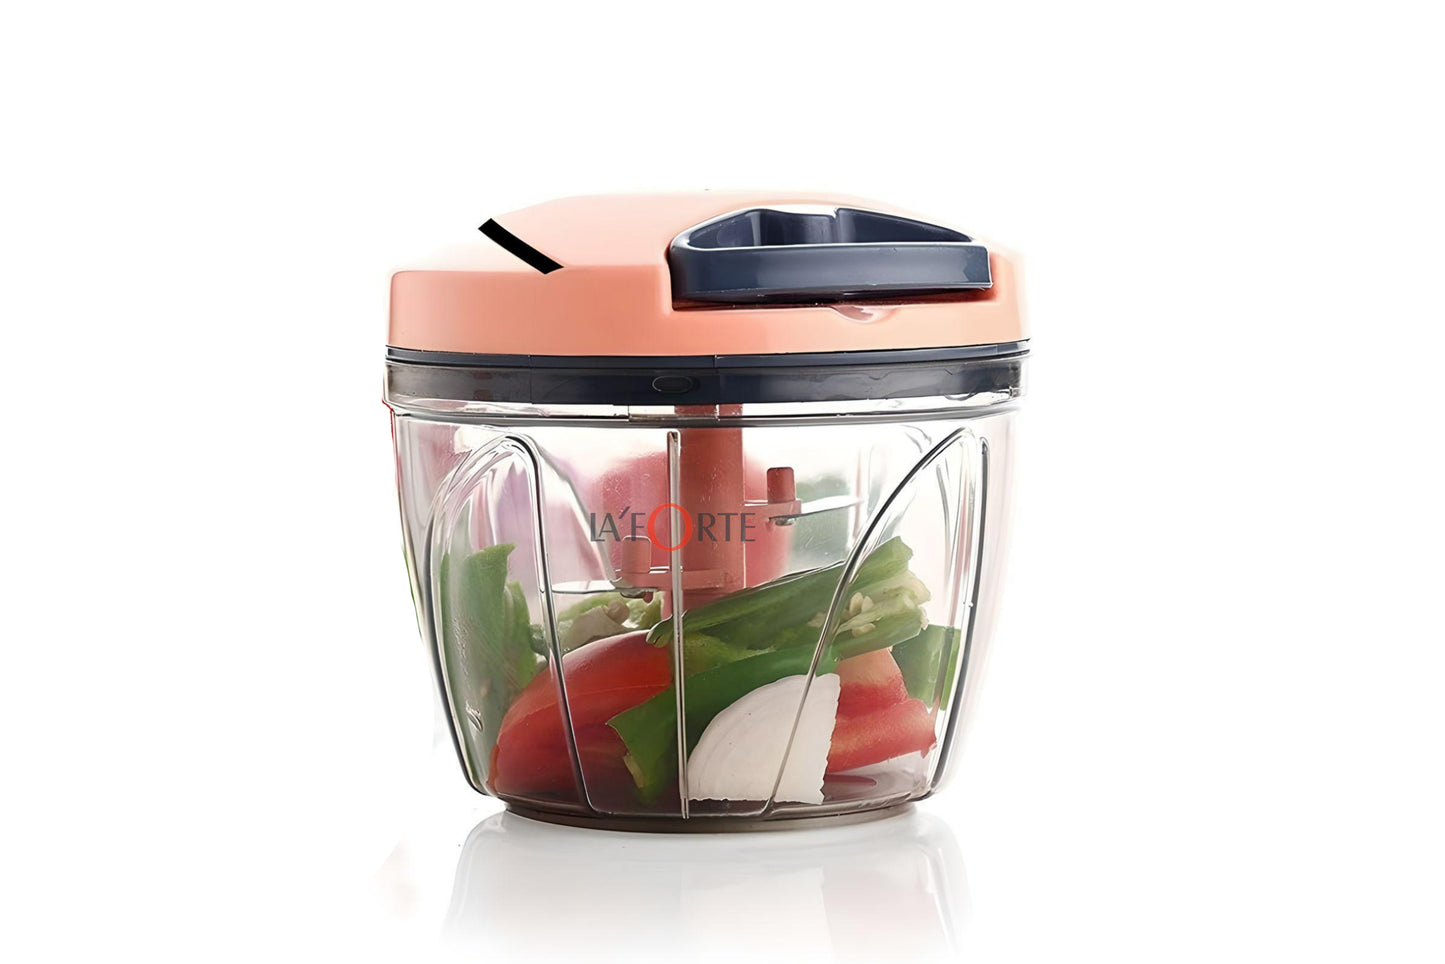 Manual Stainless Steel Compact Extra Sharp Vegetable Chopper with 5 Blades  (750 ml)0065A